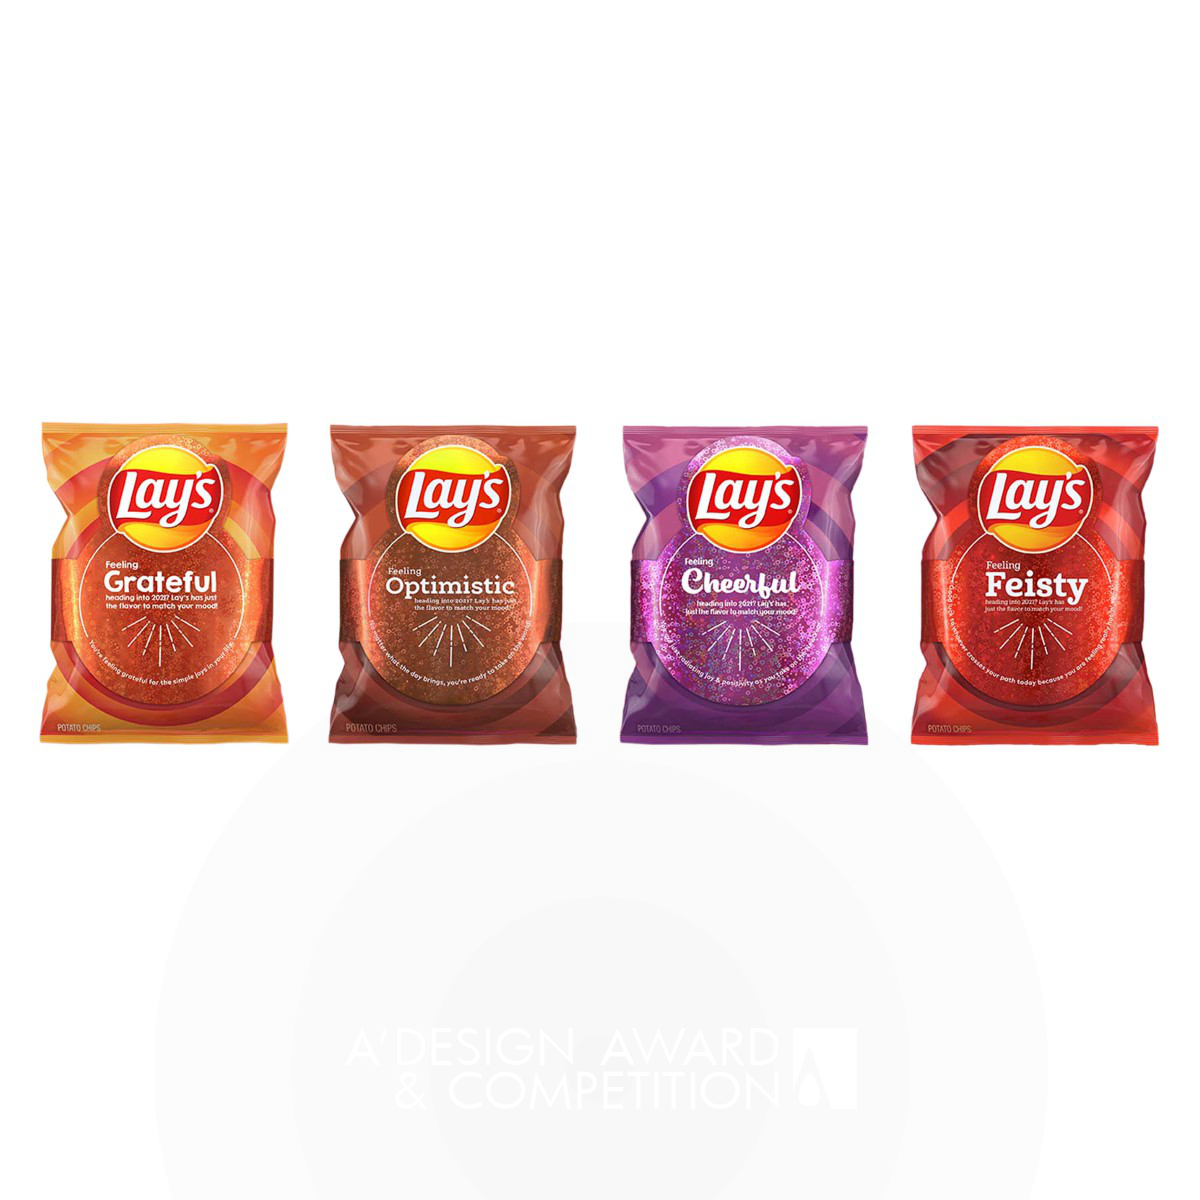 Lay's 2021 Mood Match Food Packaging by PepsiCo Design and Innovation